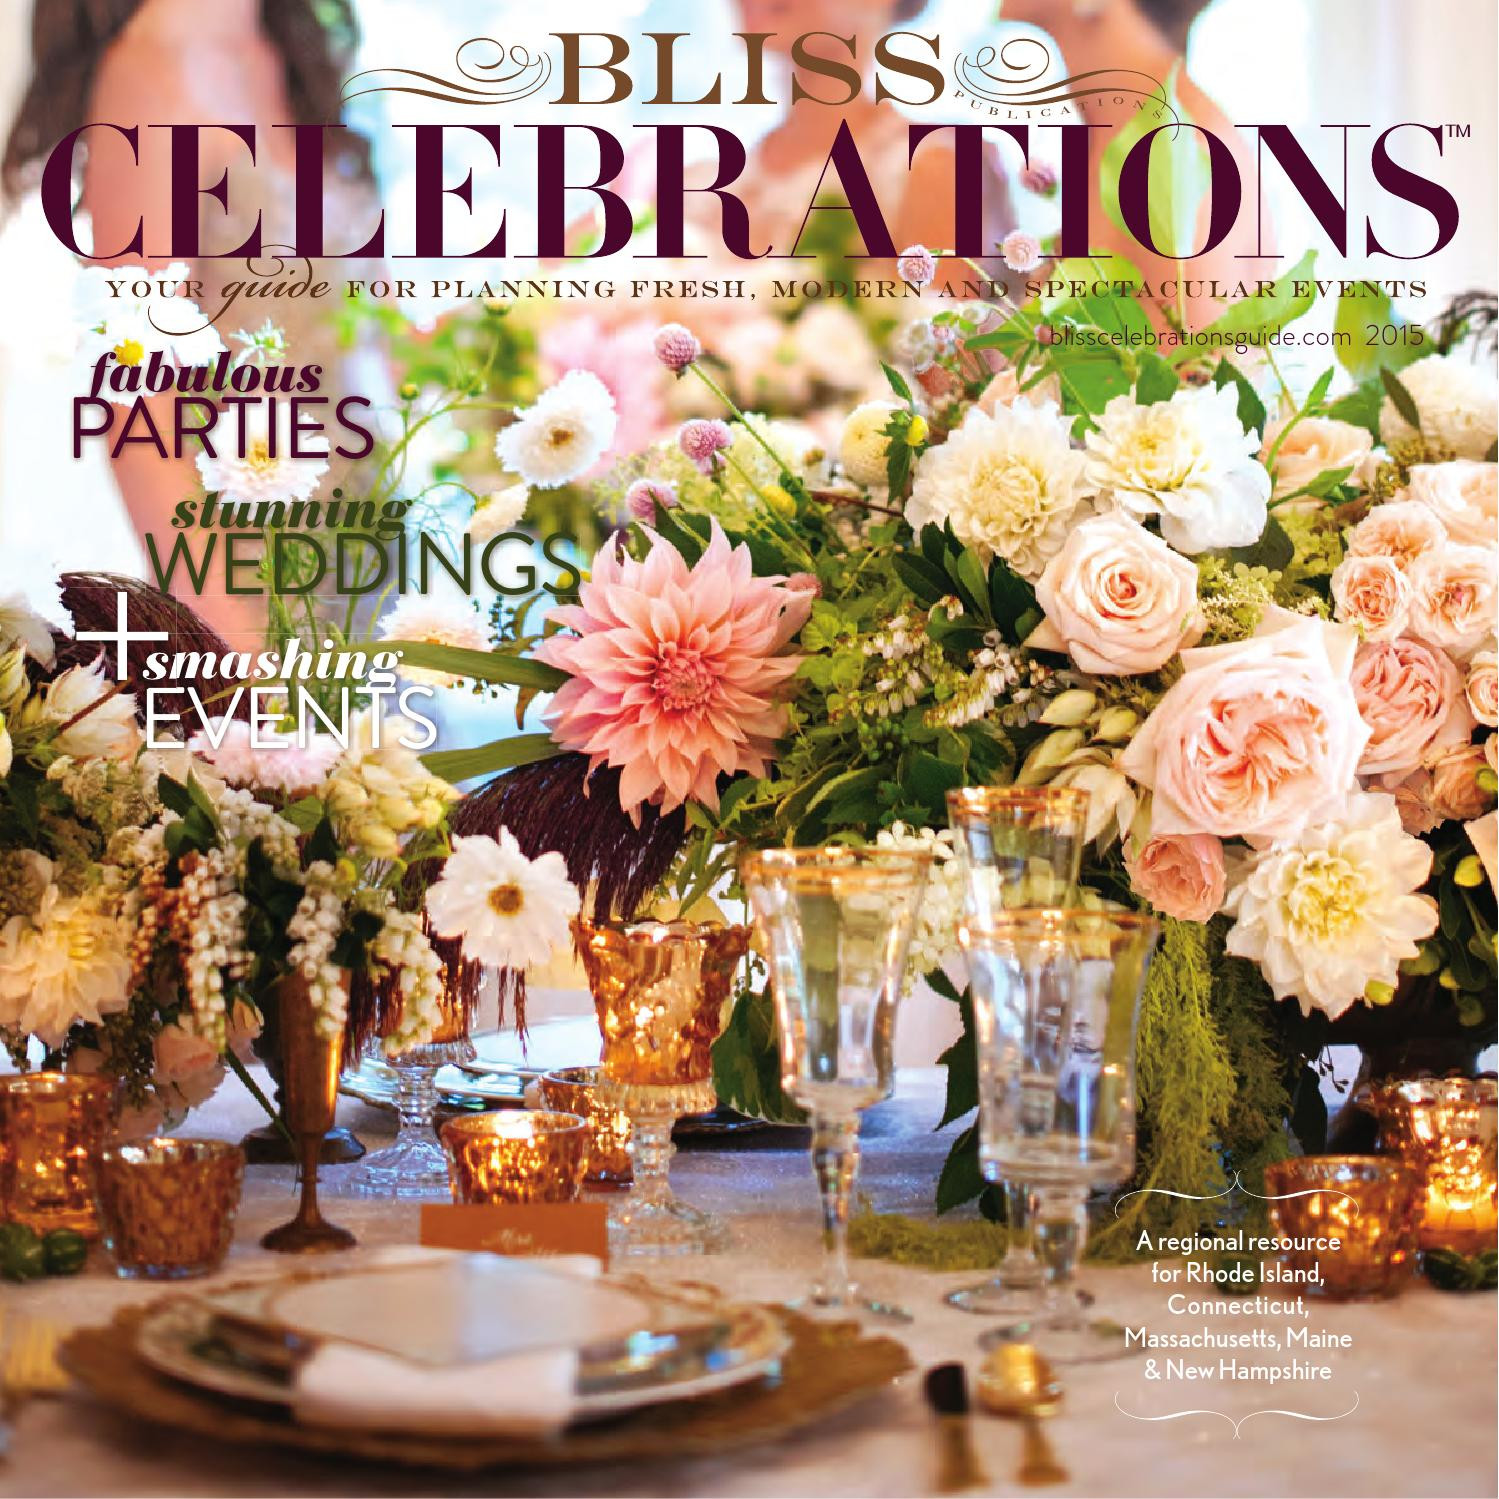 antique hyacinth vases for sale of 2015 bliss celebrations guide by bliss publications issuu throughout page 1